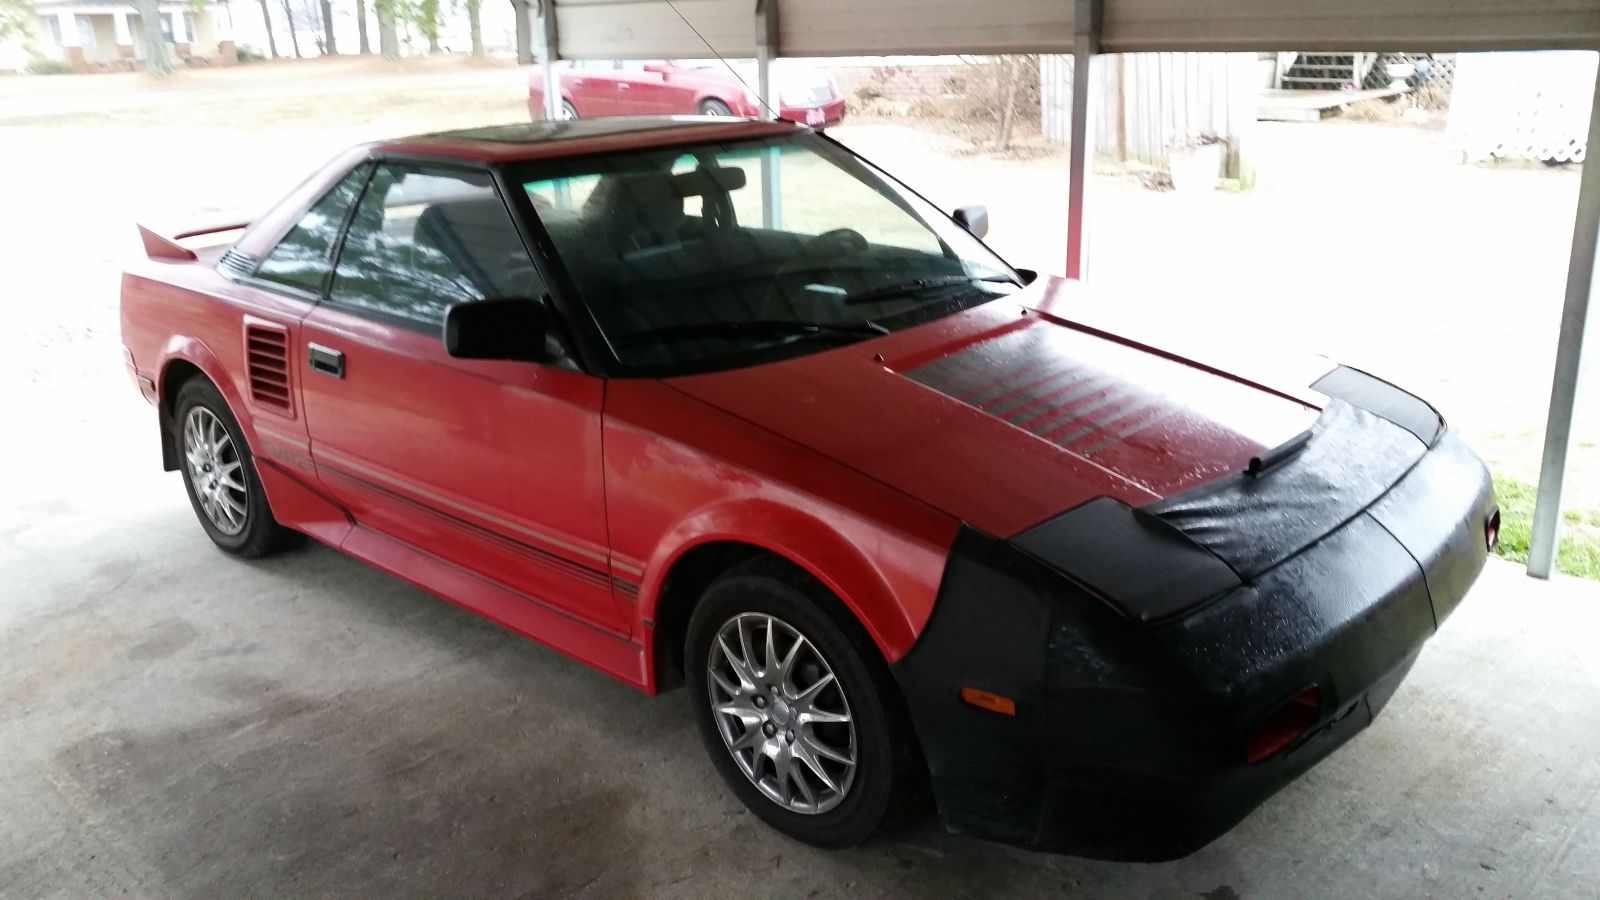 This is not my car, but before I bought my Miata I went and looked at this MR2. 